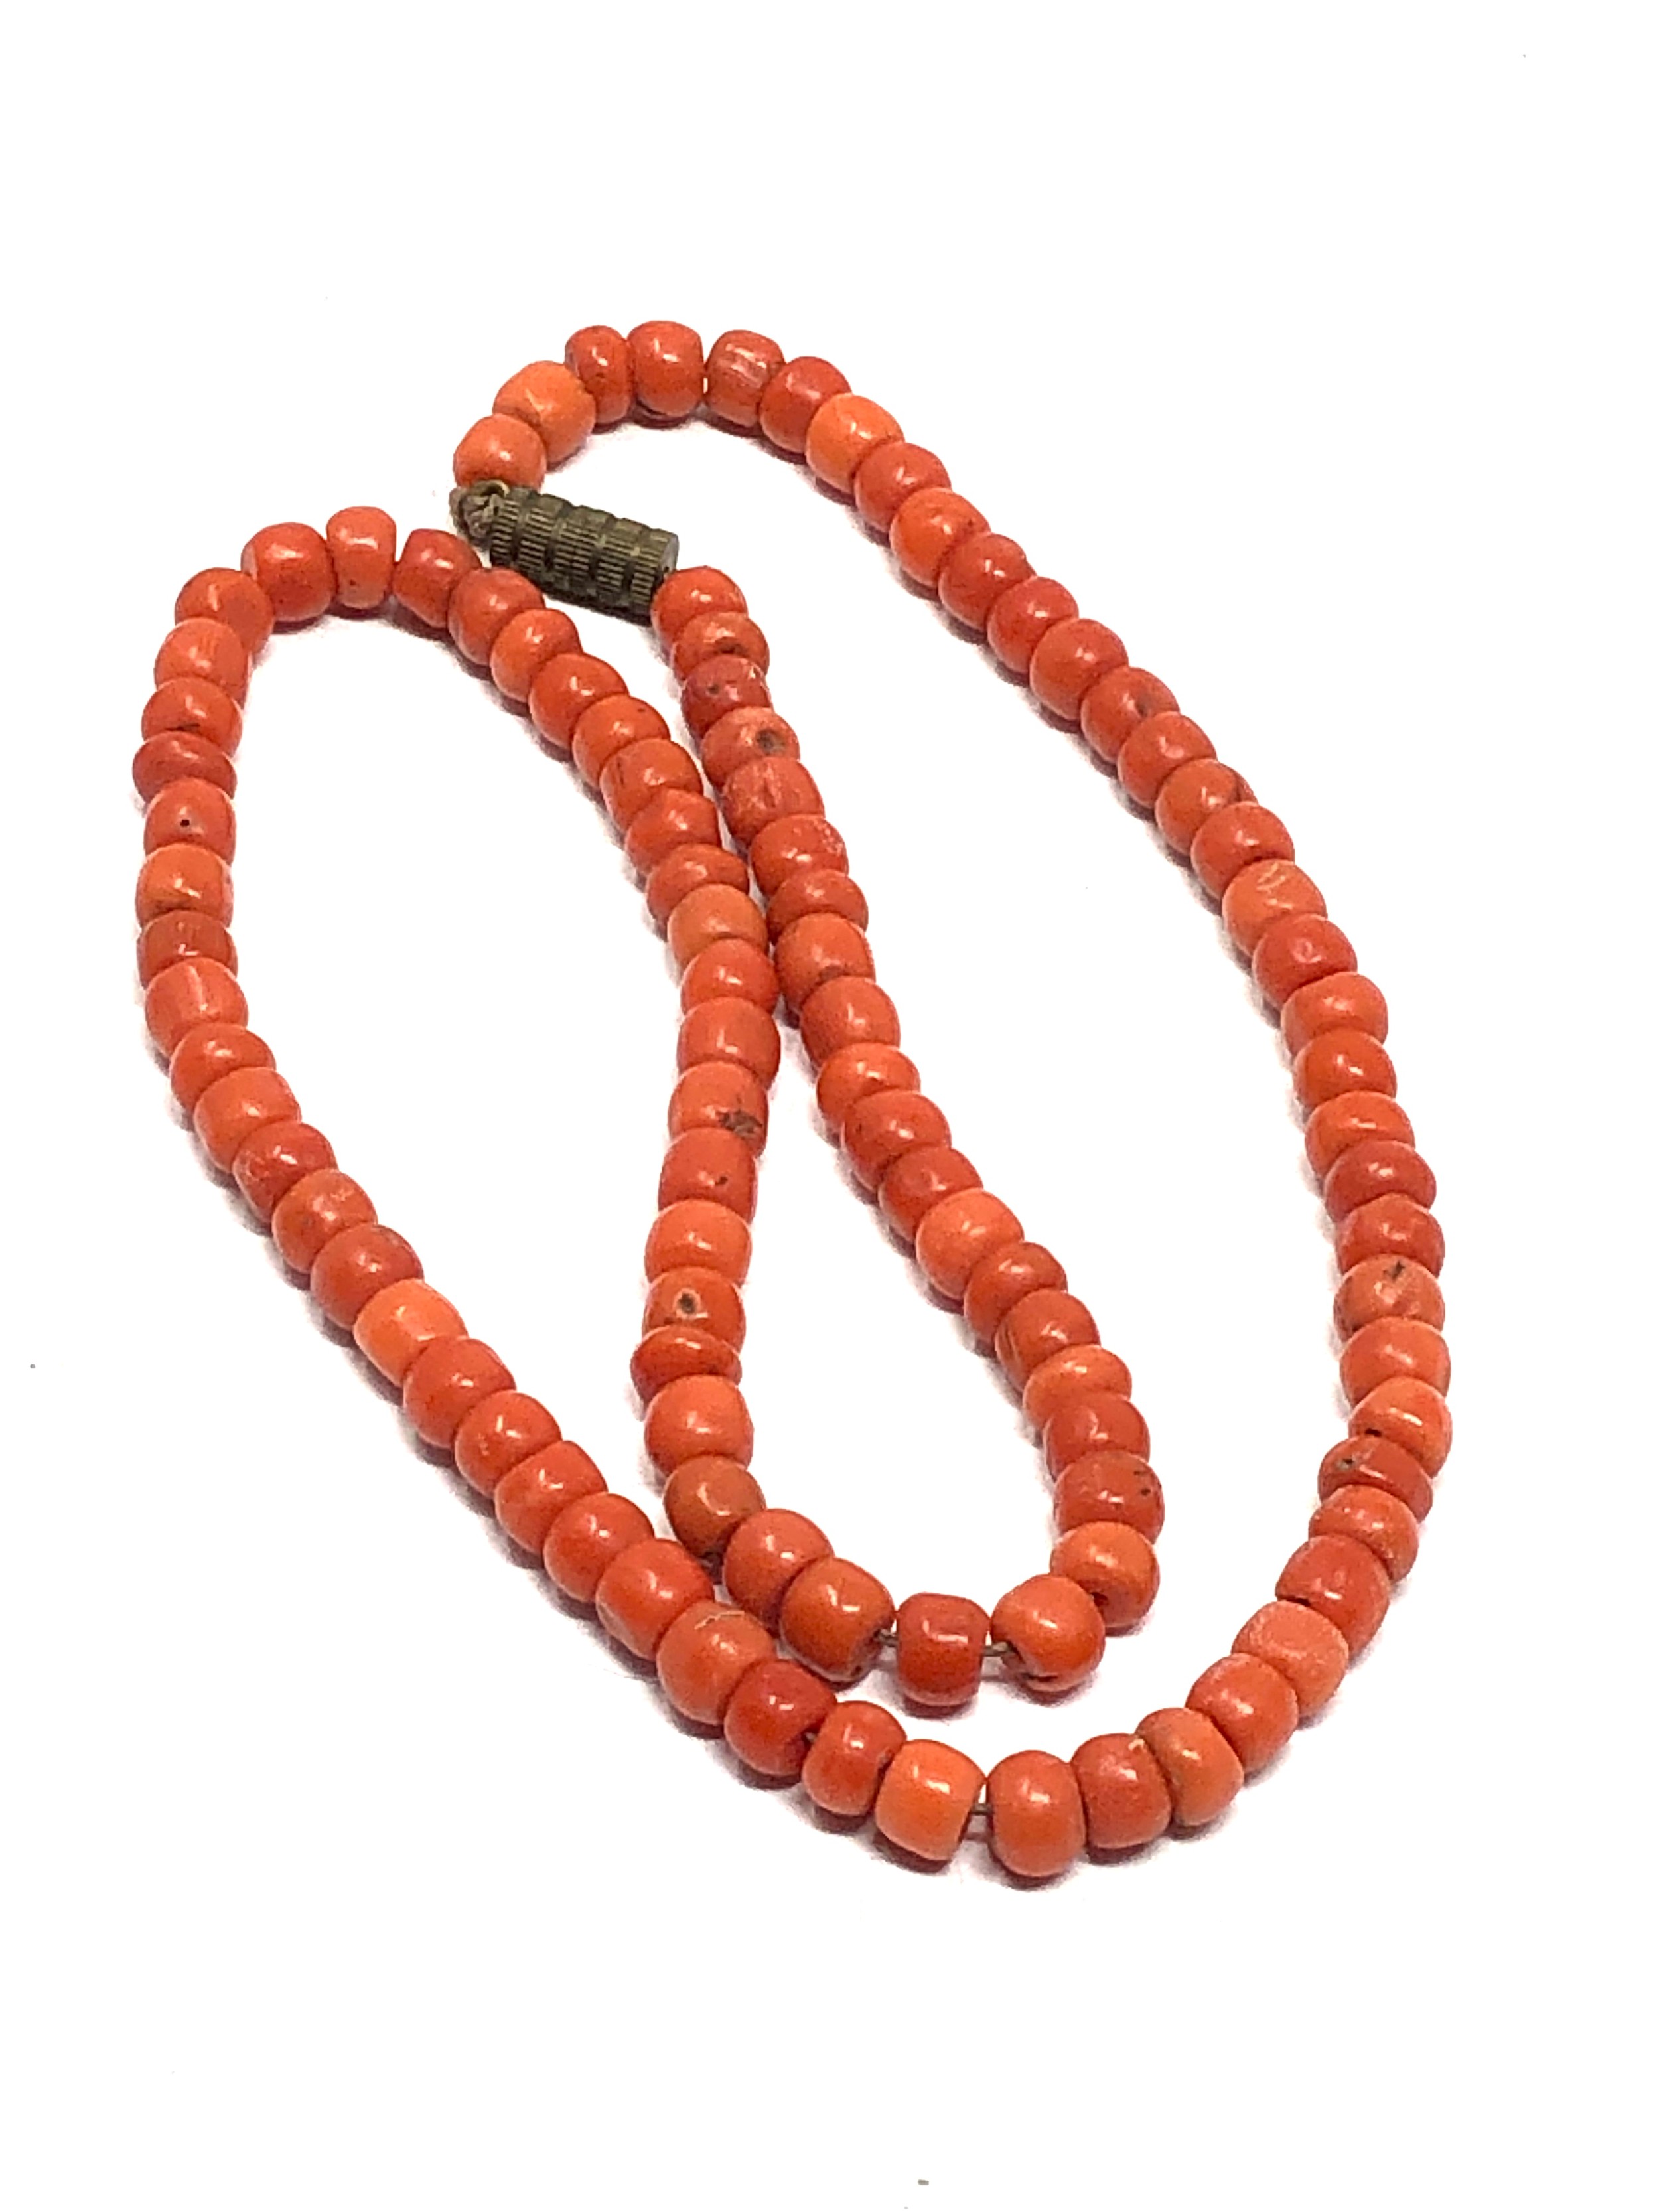 Fine Antique red coral necklace average size of beads approx 6.mm weight 25g later metal clasp